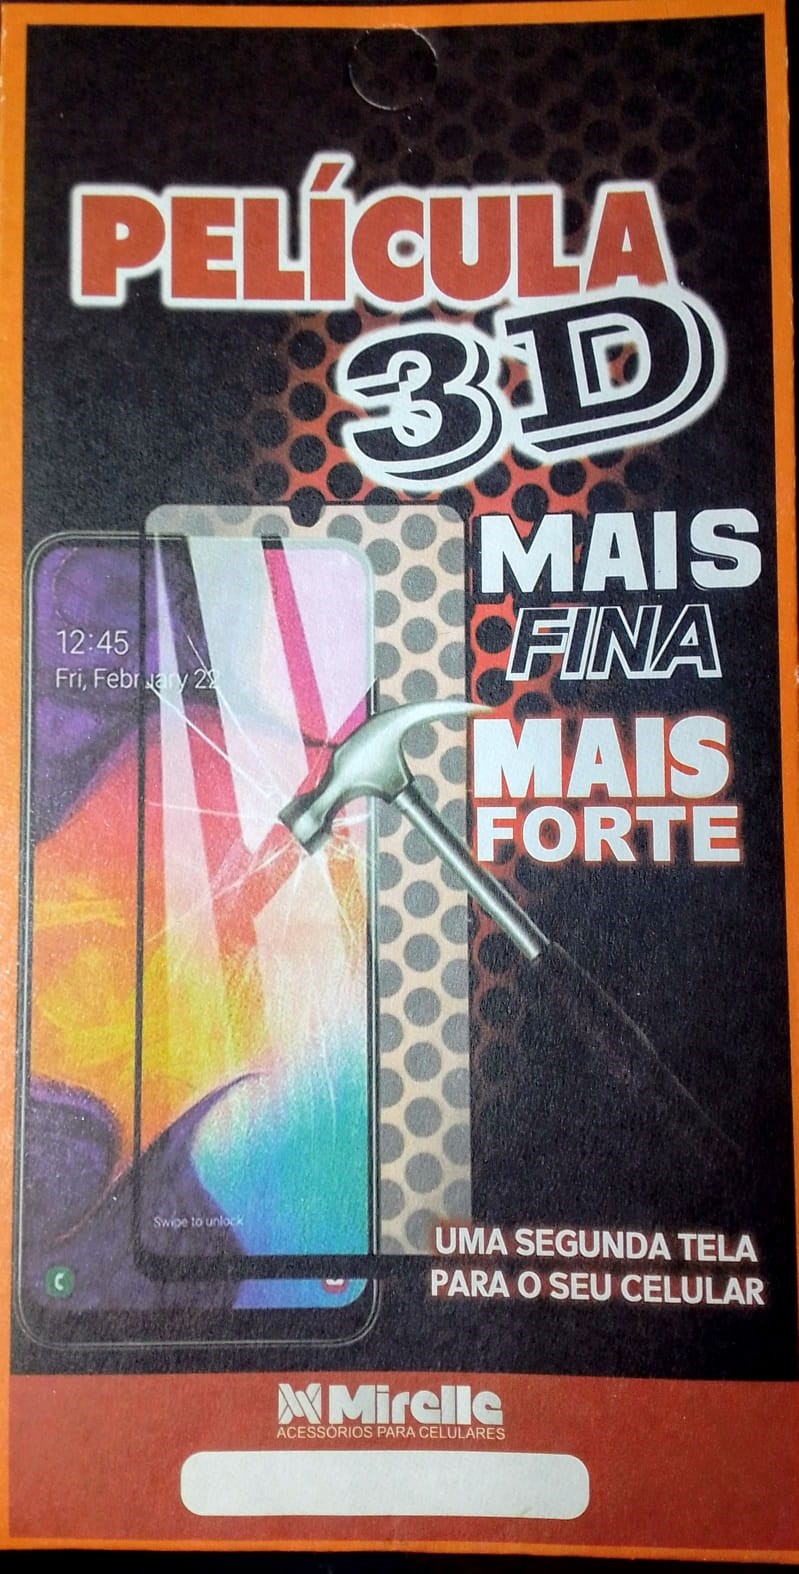  - Pelicula 3D - 1 KIT = 5 UNIDADE            Cod. A73 / M62  NOTE 11S 5 G